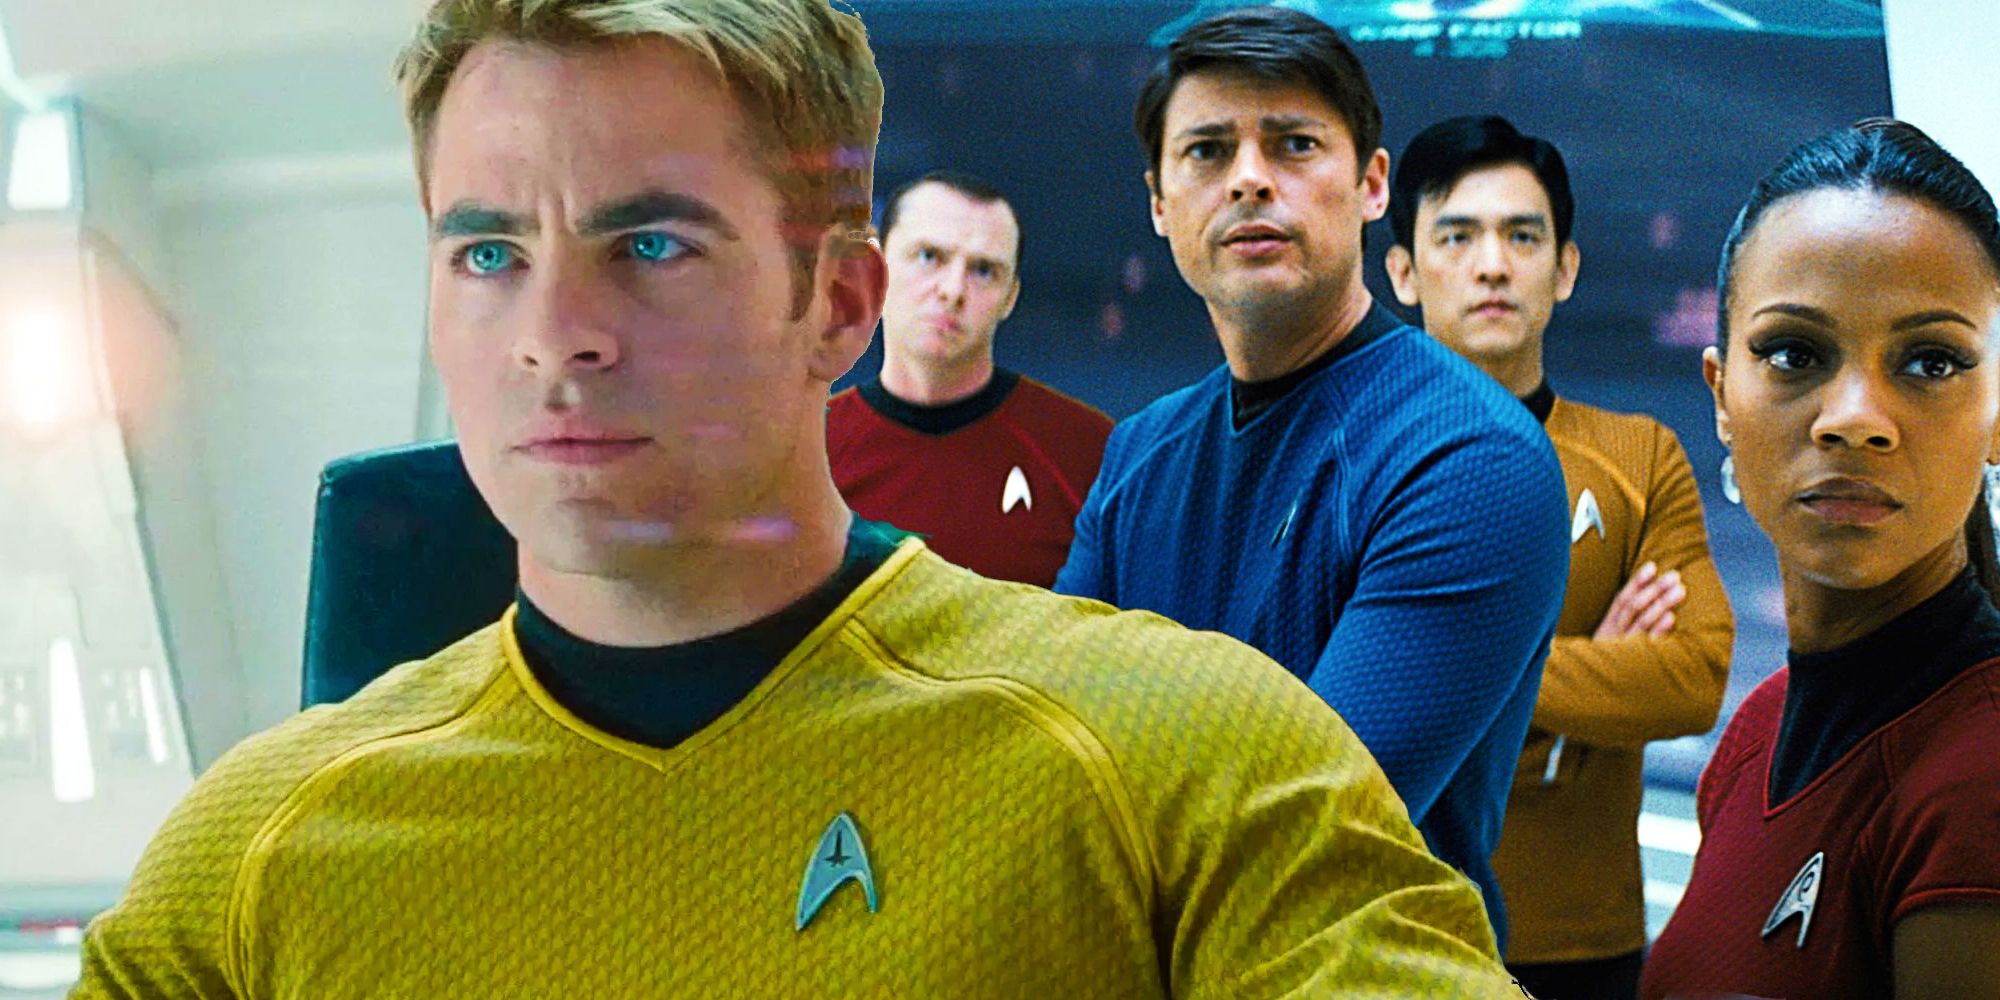 Chris Pine as Kirk and the cast of Star Trek